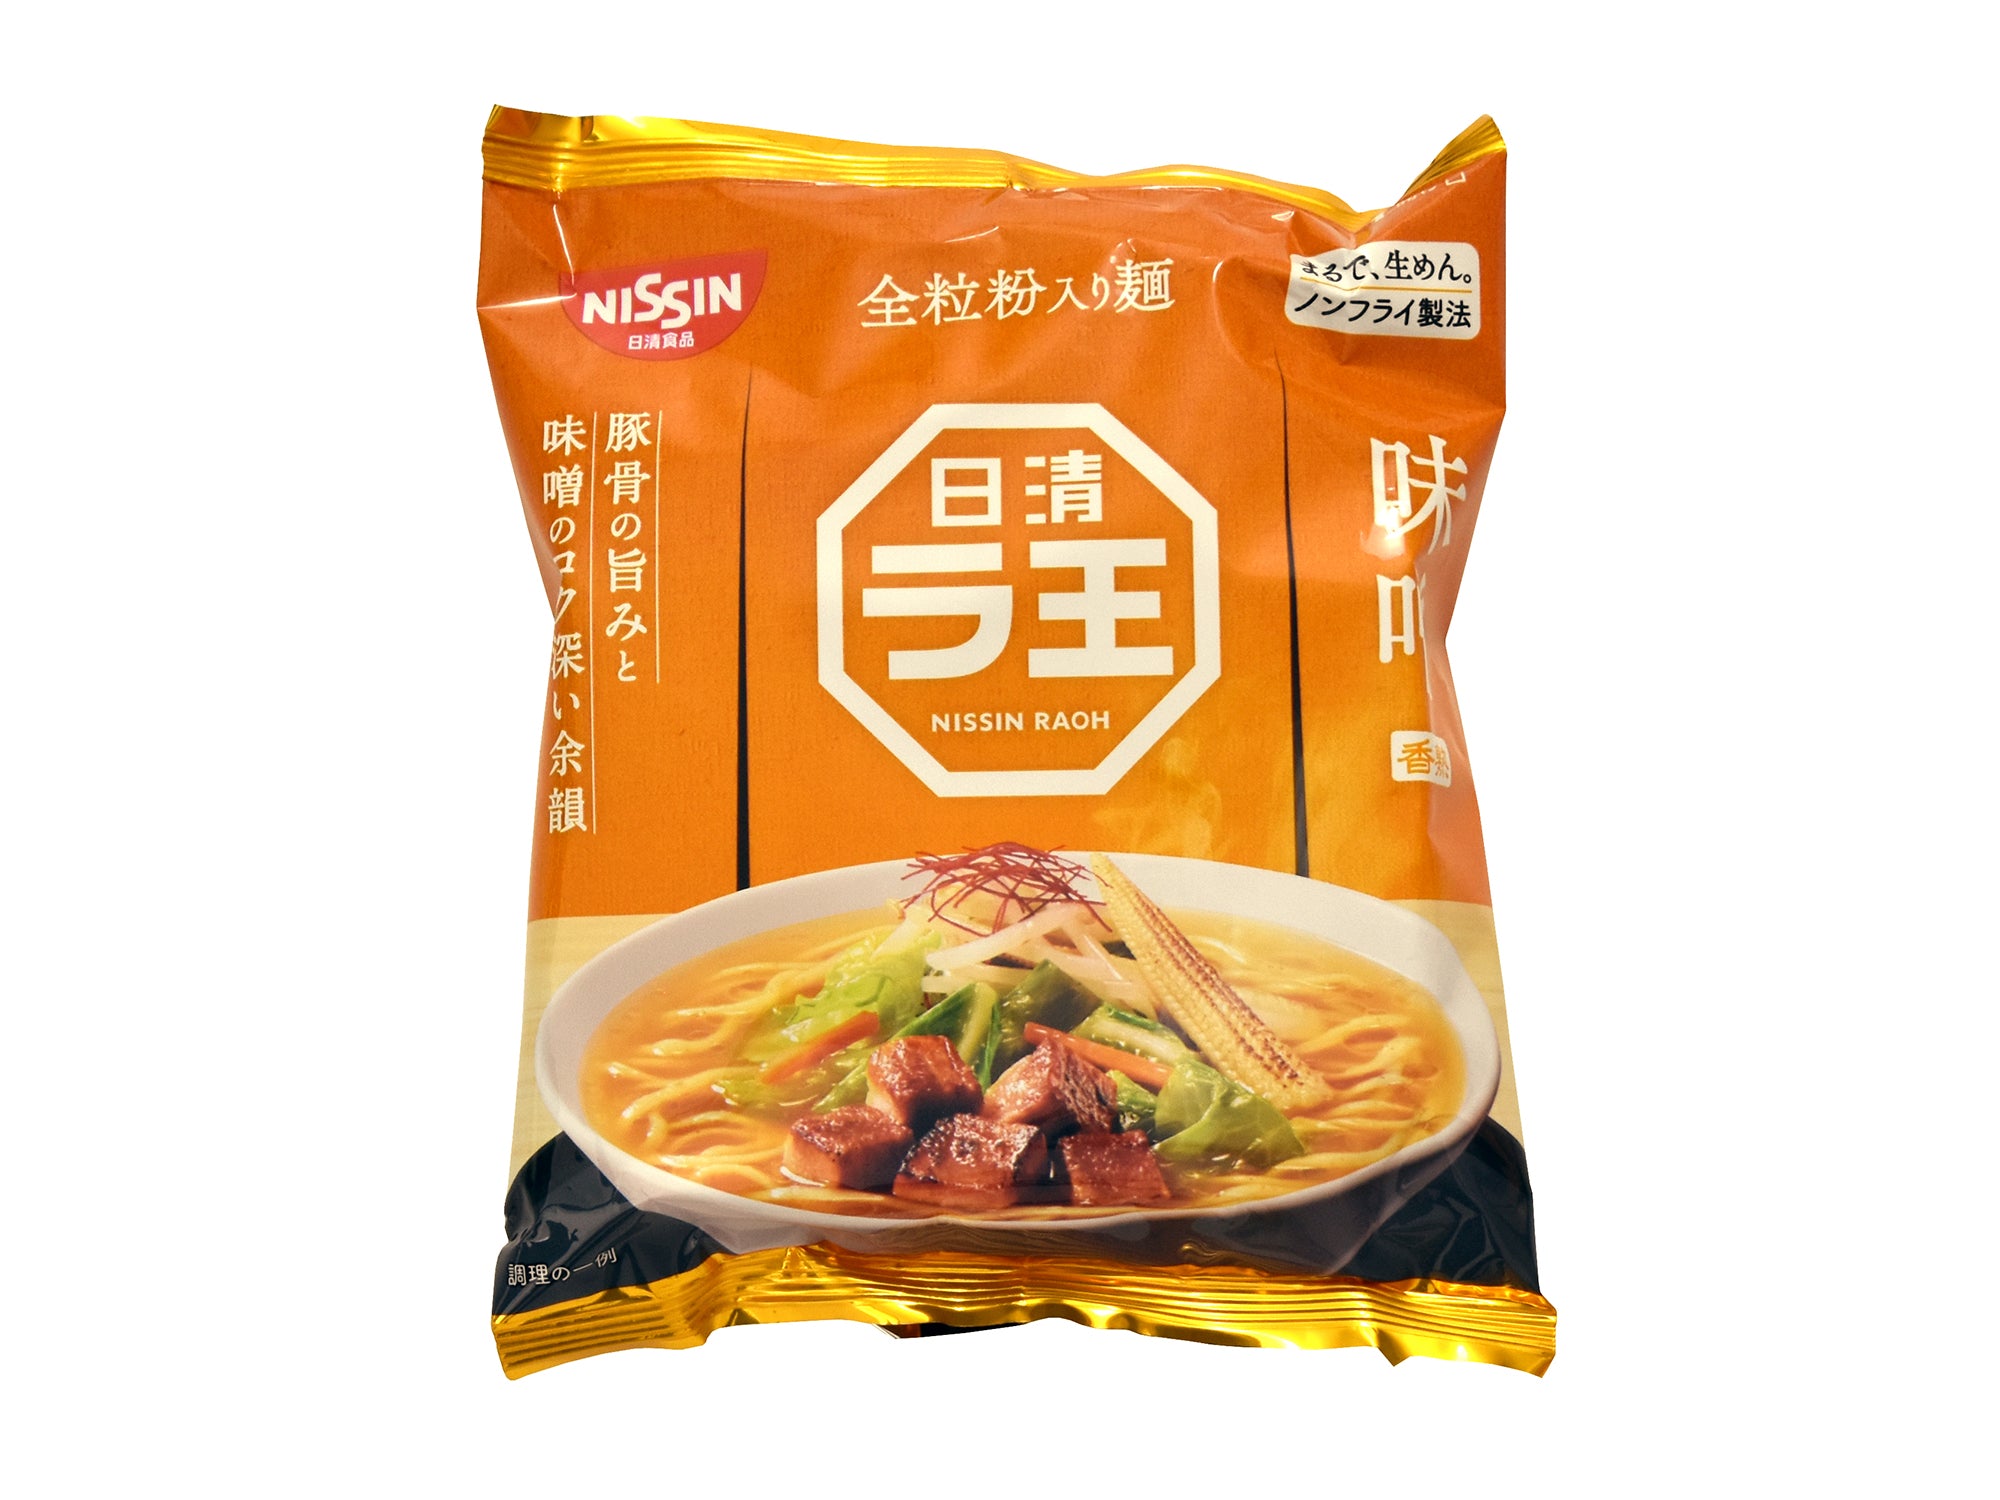 Nissin Raoh Instant Ramen Miso Flavor Review: This Ramen Will Become Your Next Favorite